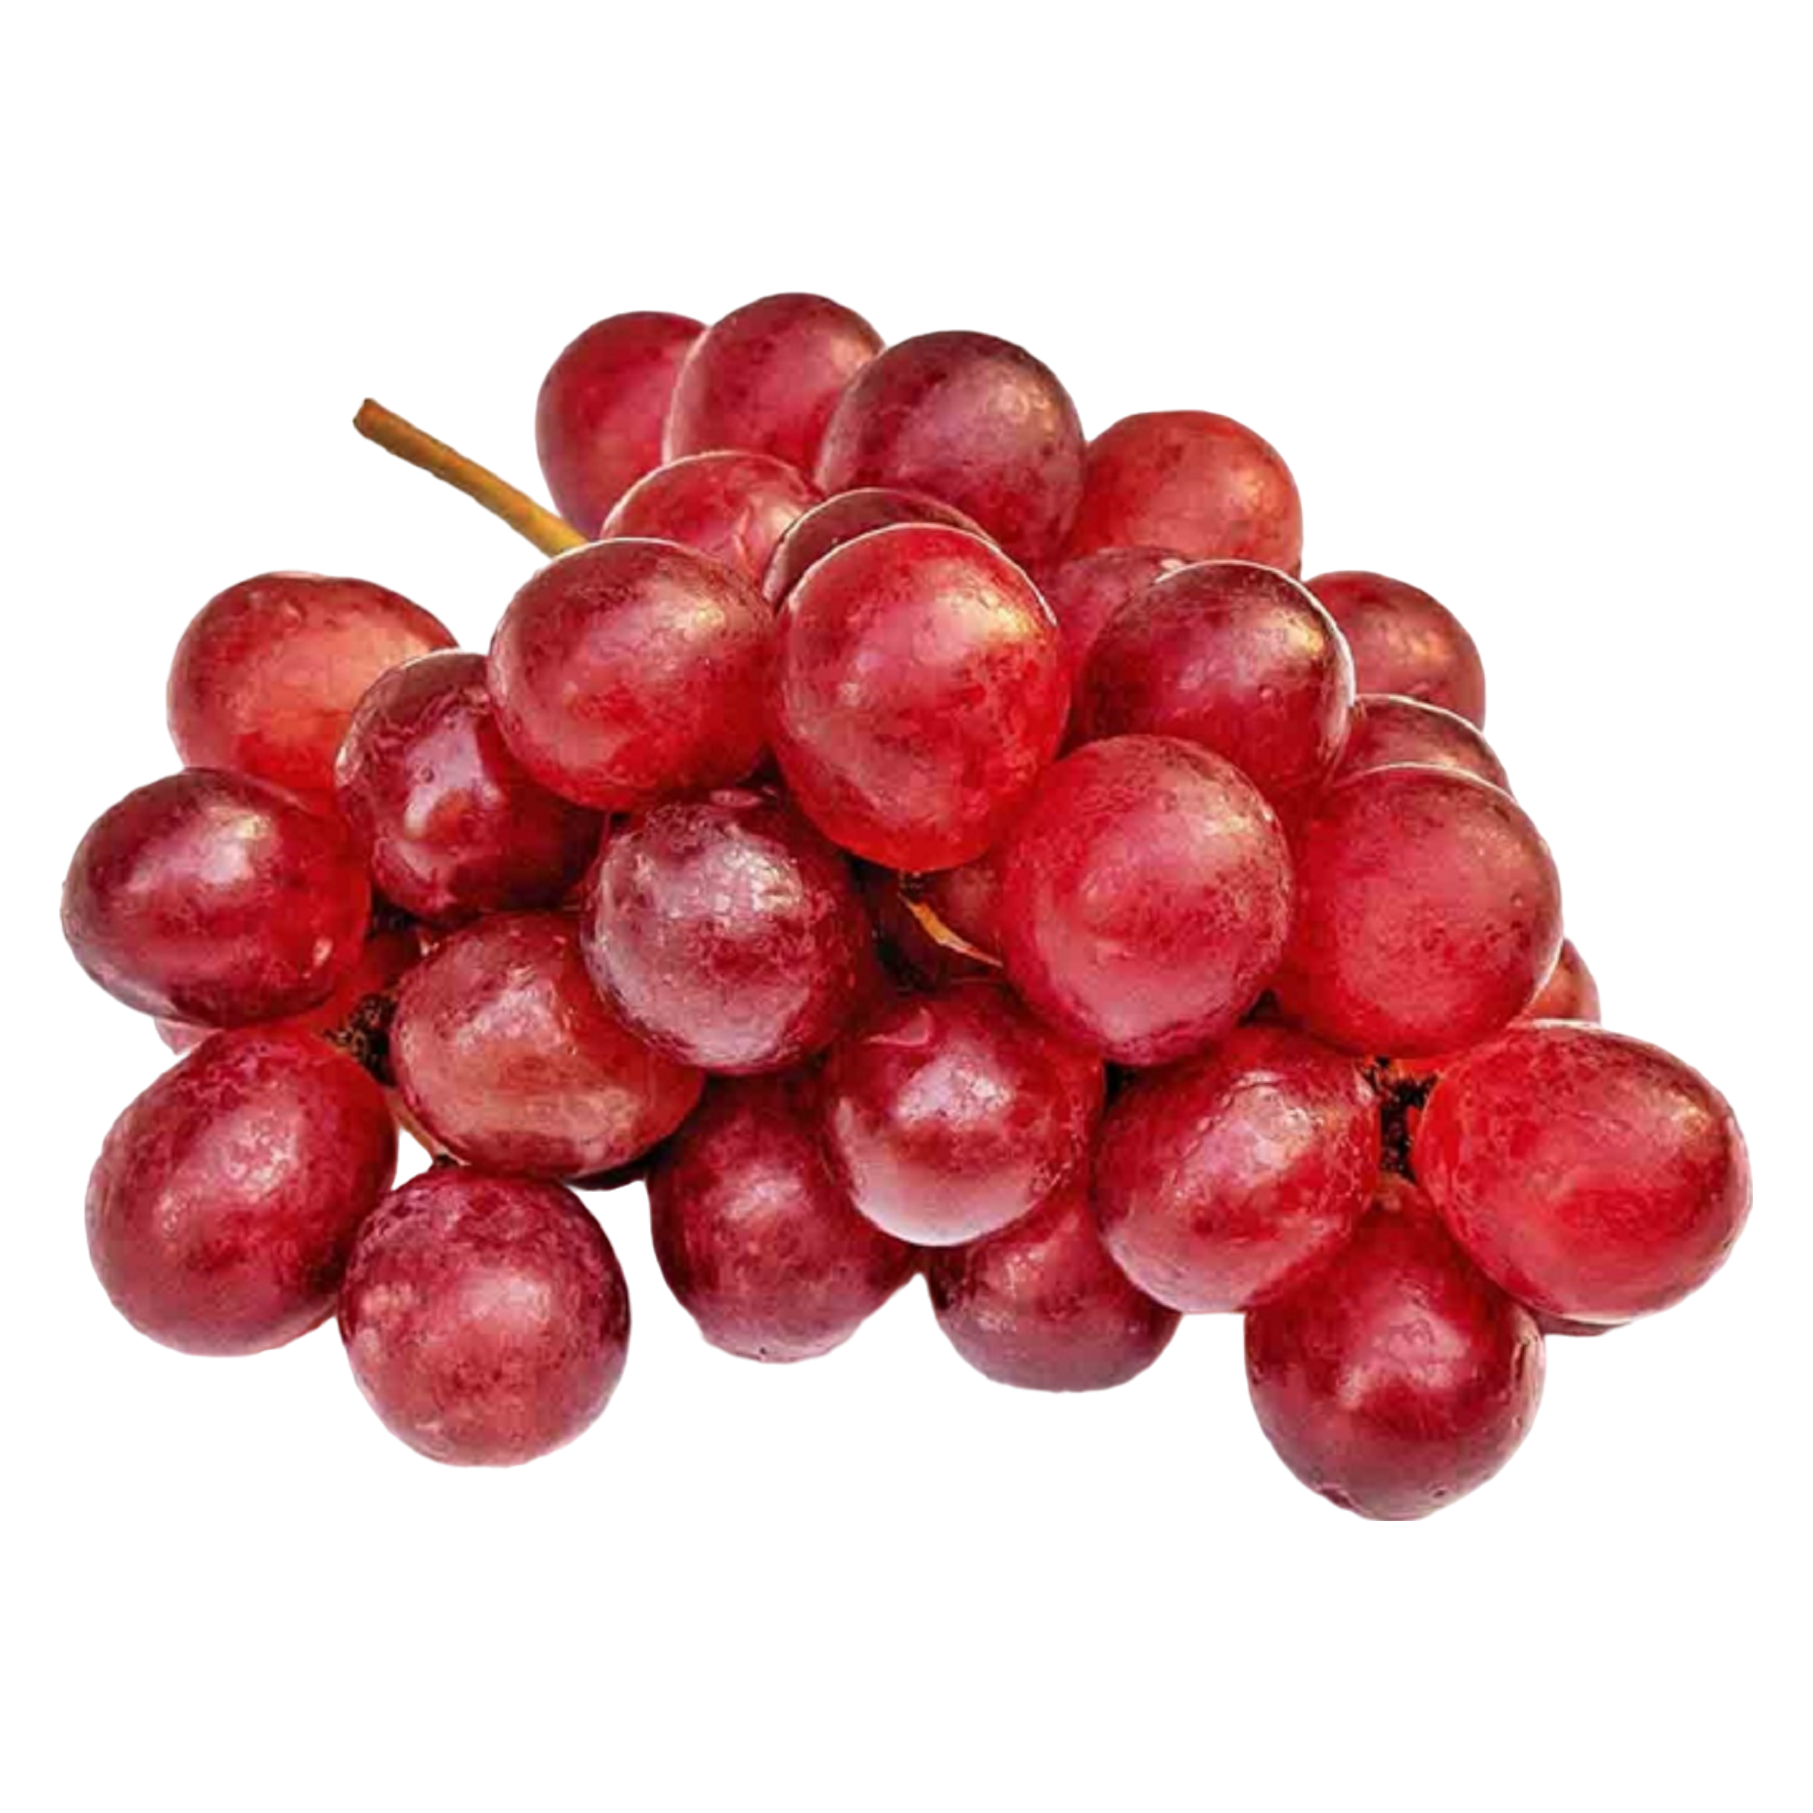 Red Seedless Grapes - 2lbs